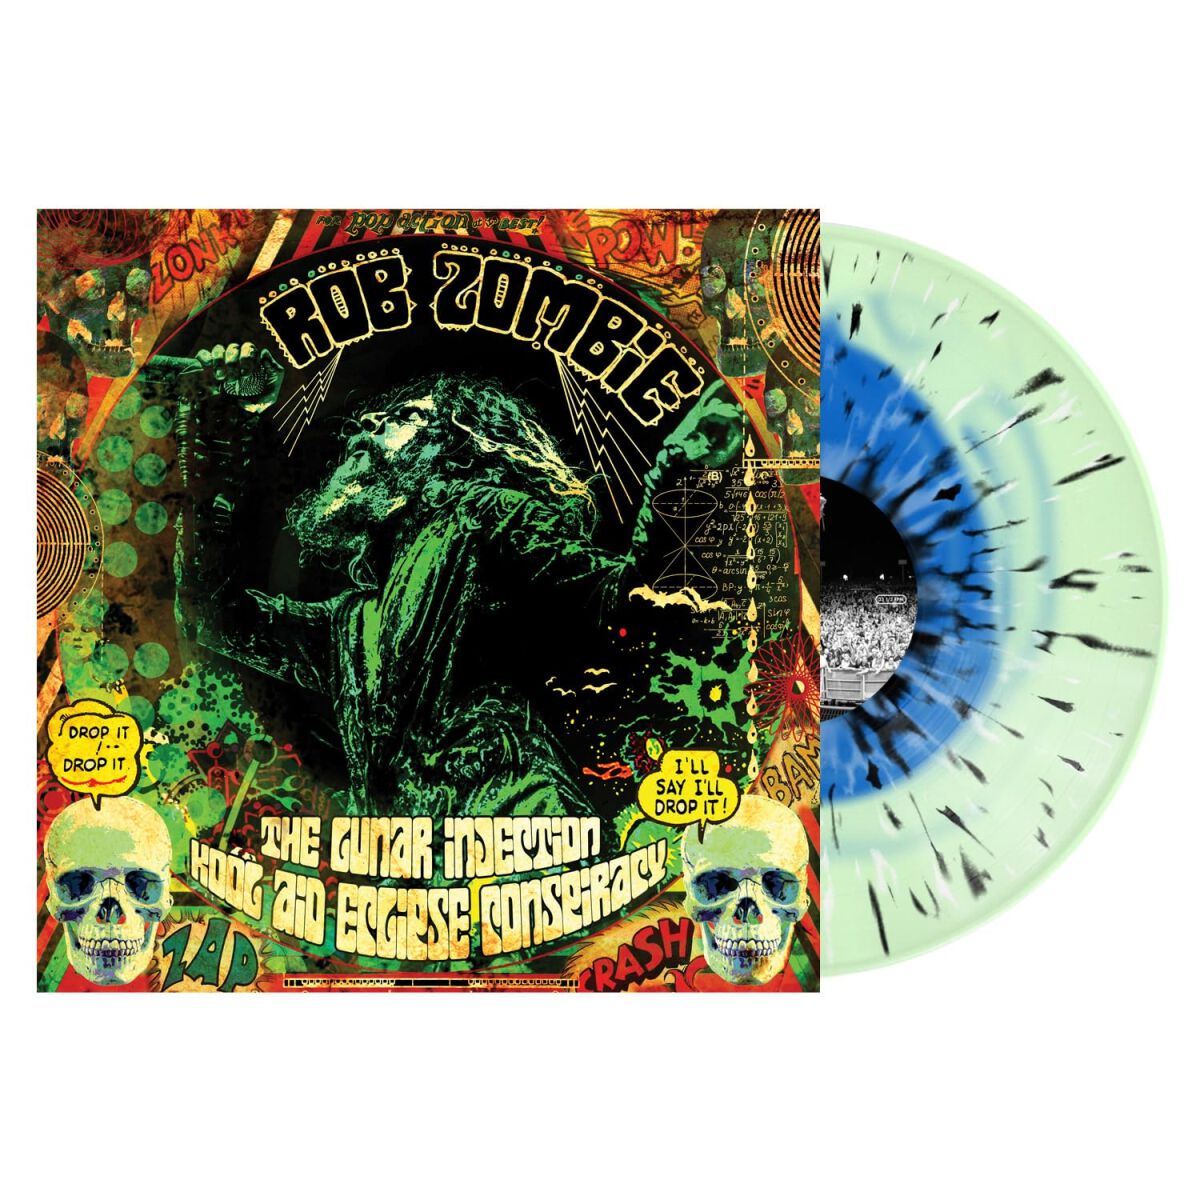 Image of LP di Rob Zombie - The lunar injection kool aid eclipse conspiracy - Unisex - standard